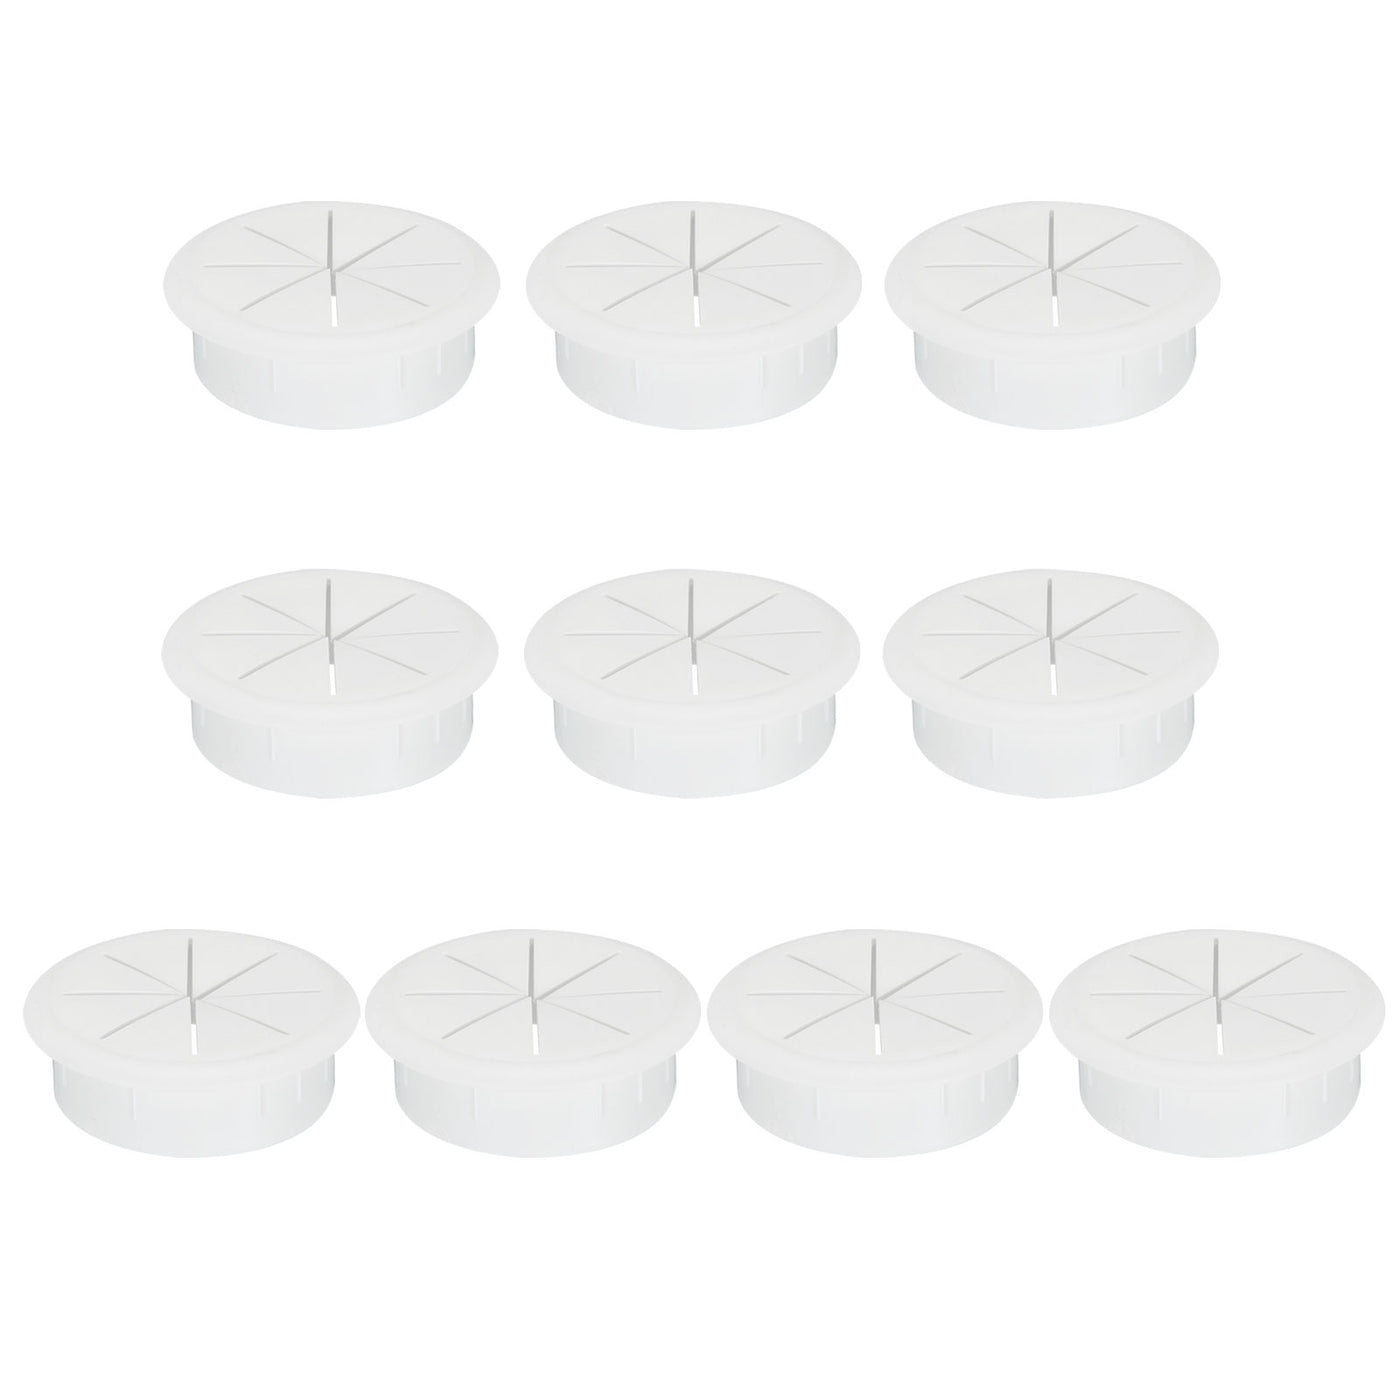 uxcell Uxcell 10pcs 60mm Mounting Dia White Plastic Cable Snap Locking Bushing Grommet